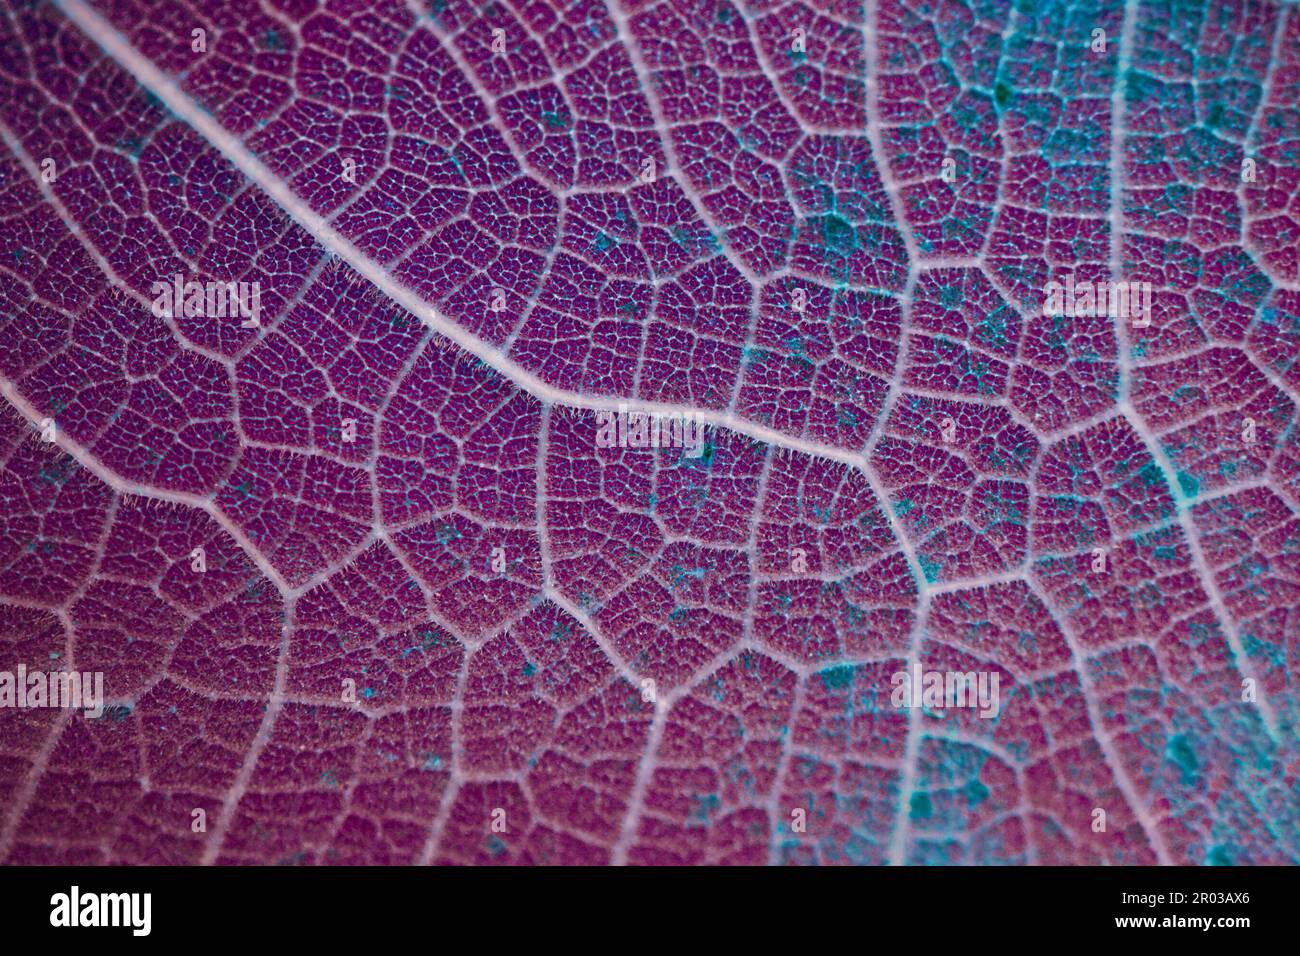 red and purple leaf veins, leaves in autunm season, abstract background Stock Photo